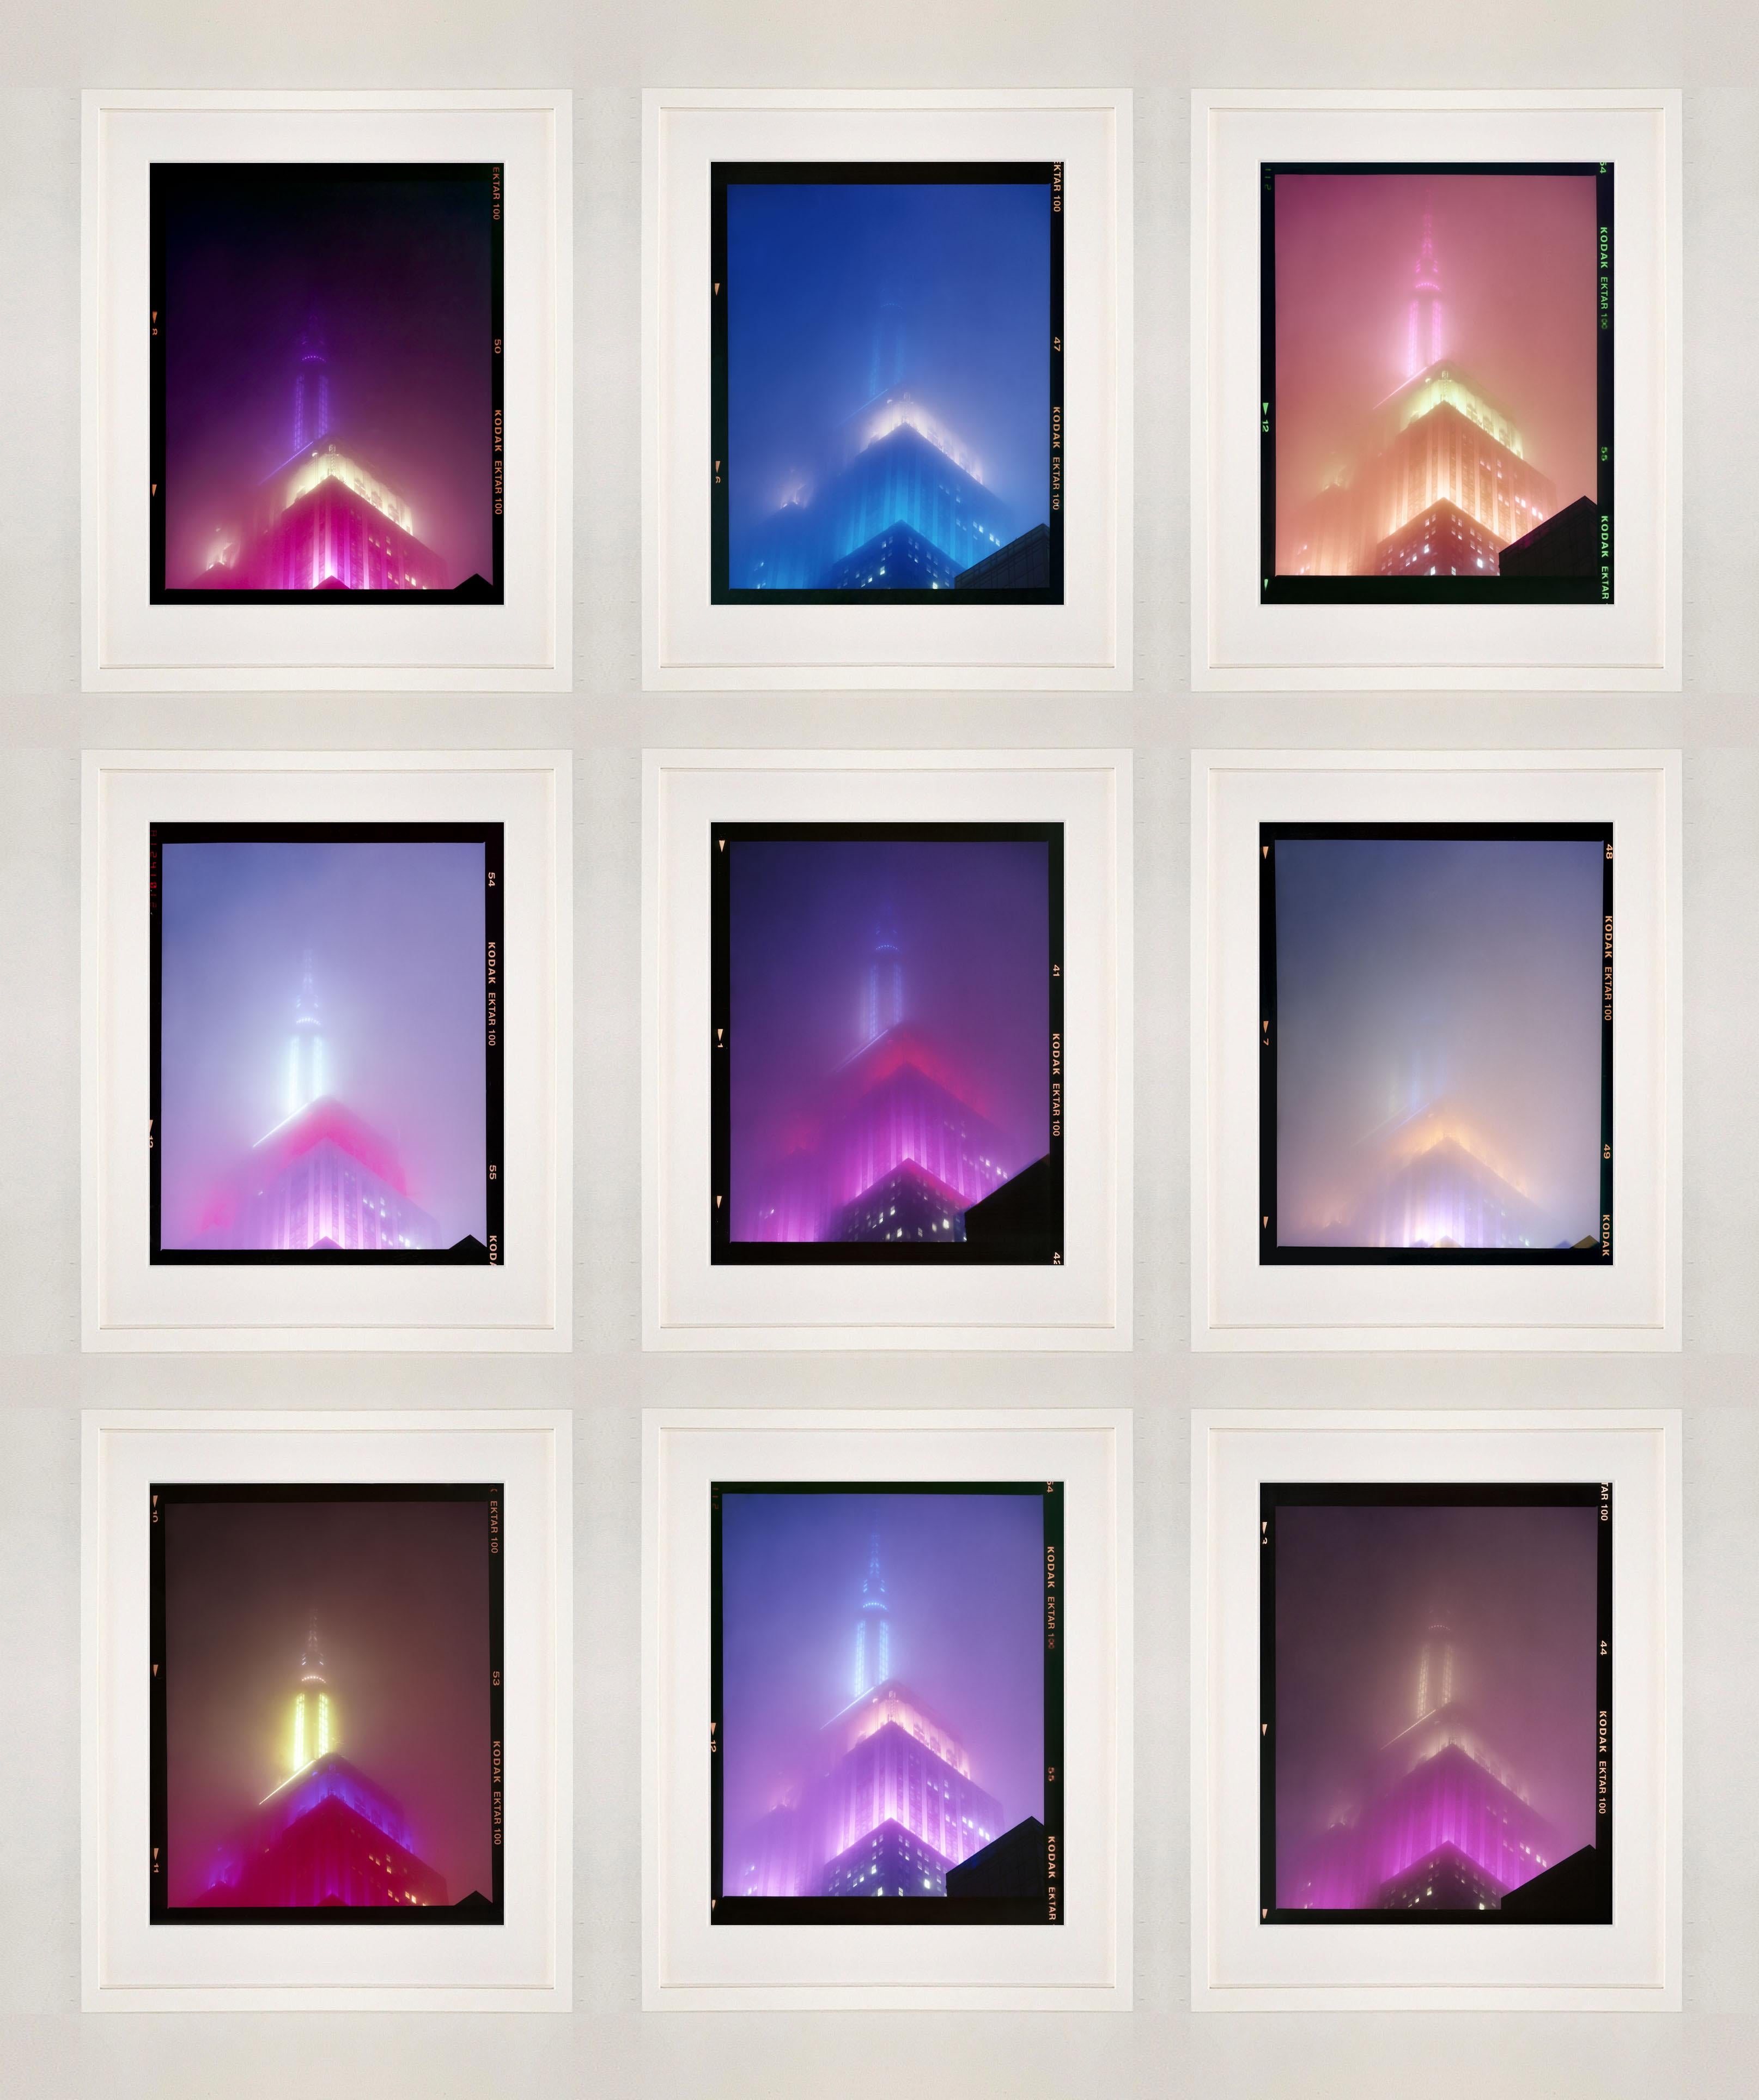 'NOMAD V (Film Rebate)', New York. Richard Heeps has photographed the iconic Empire State building in the mist. The NOMAD sequence of photographs capture the art deco architecture illuminated by changing colours, and is part of Richard's street